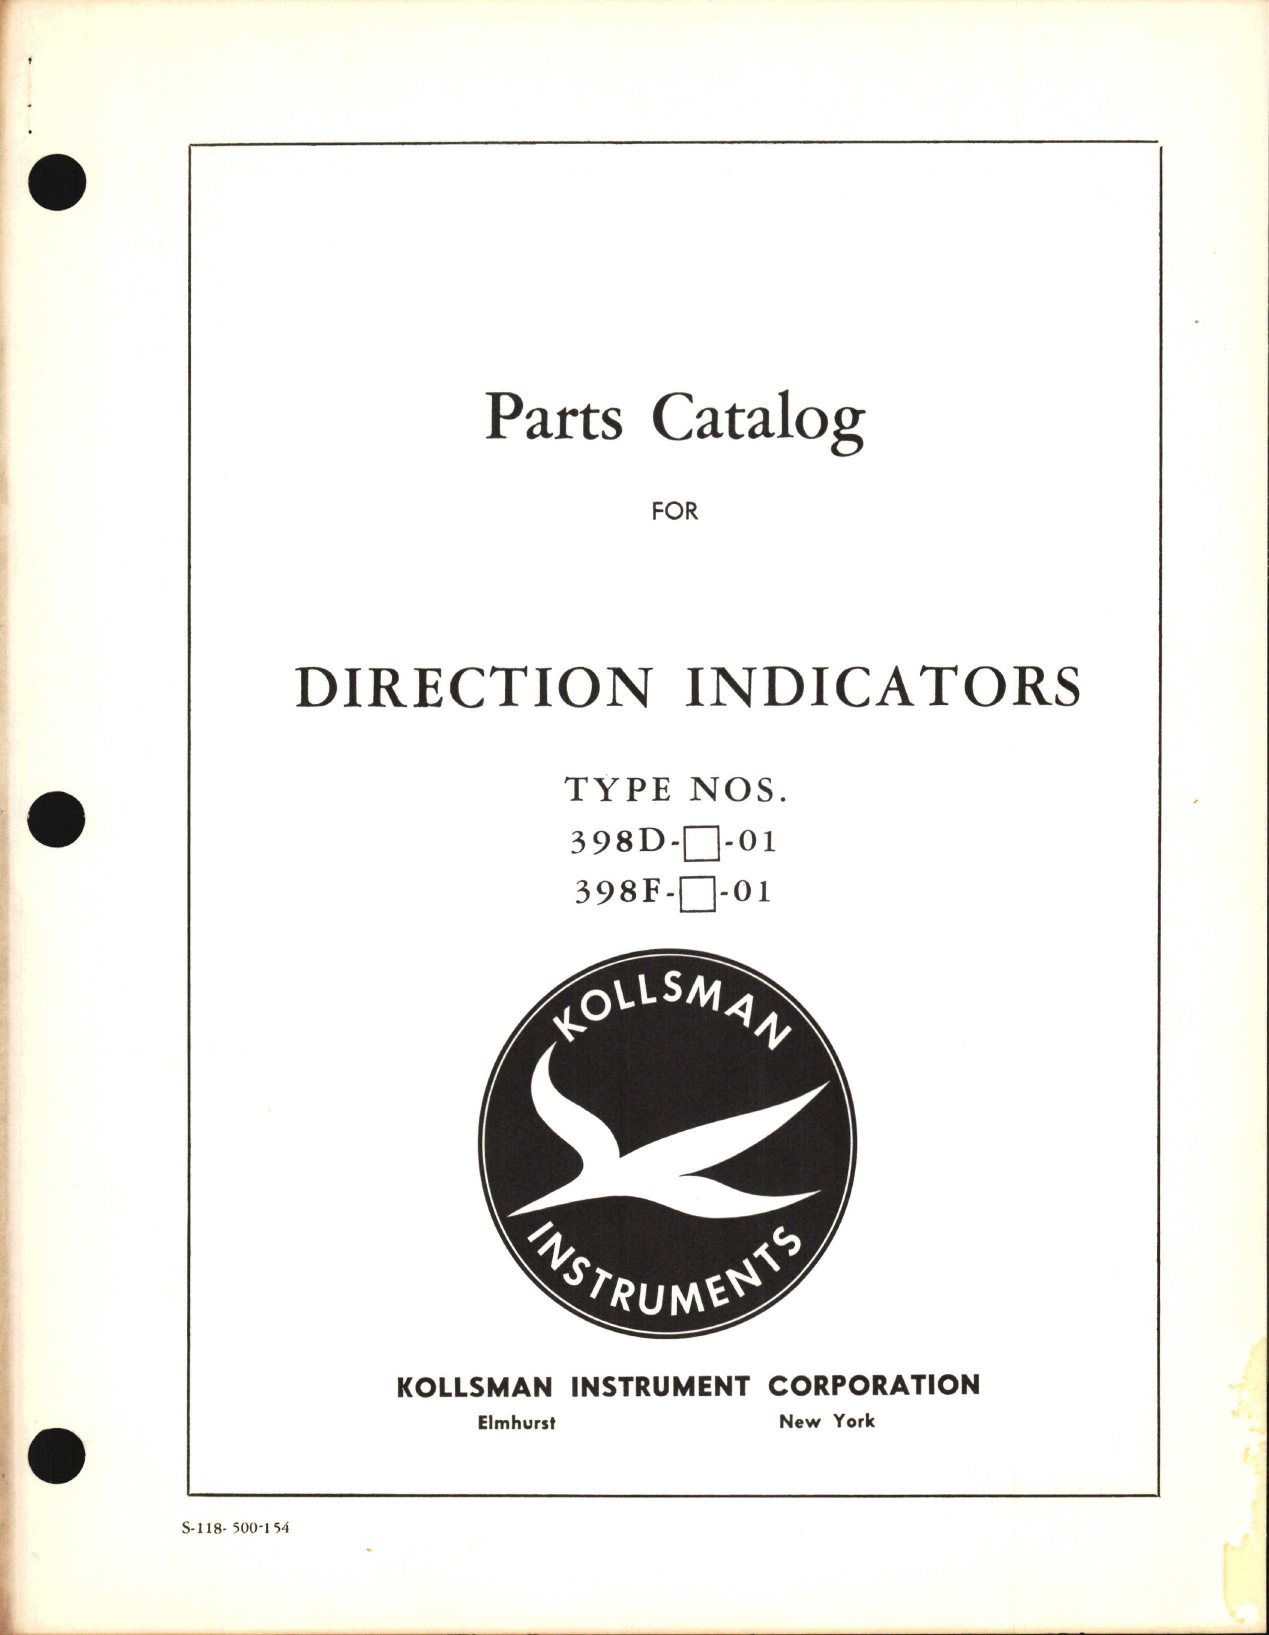 Sample page 1 from AirCorps Library document: Parts Catalog for Kollsman Direction Indicators